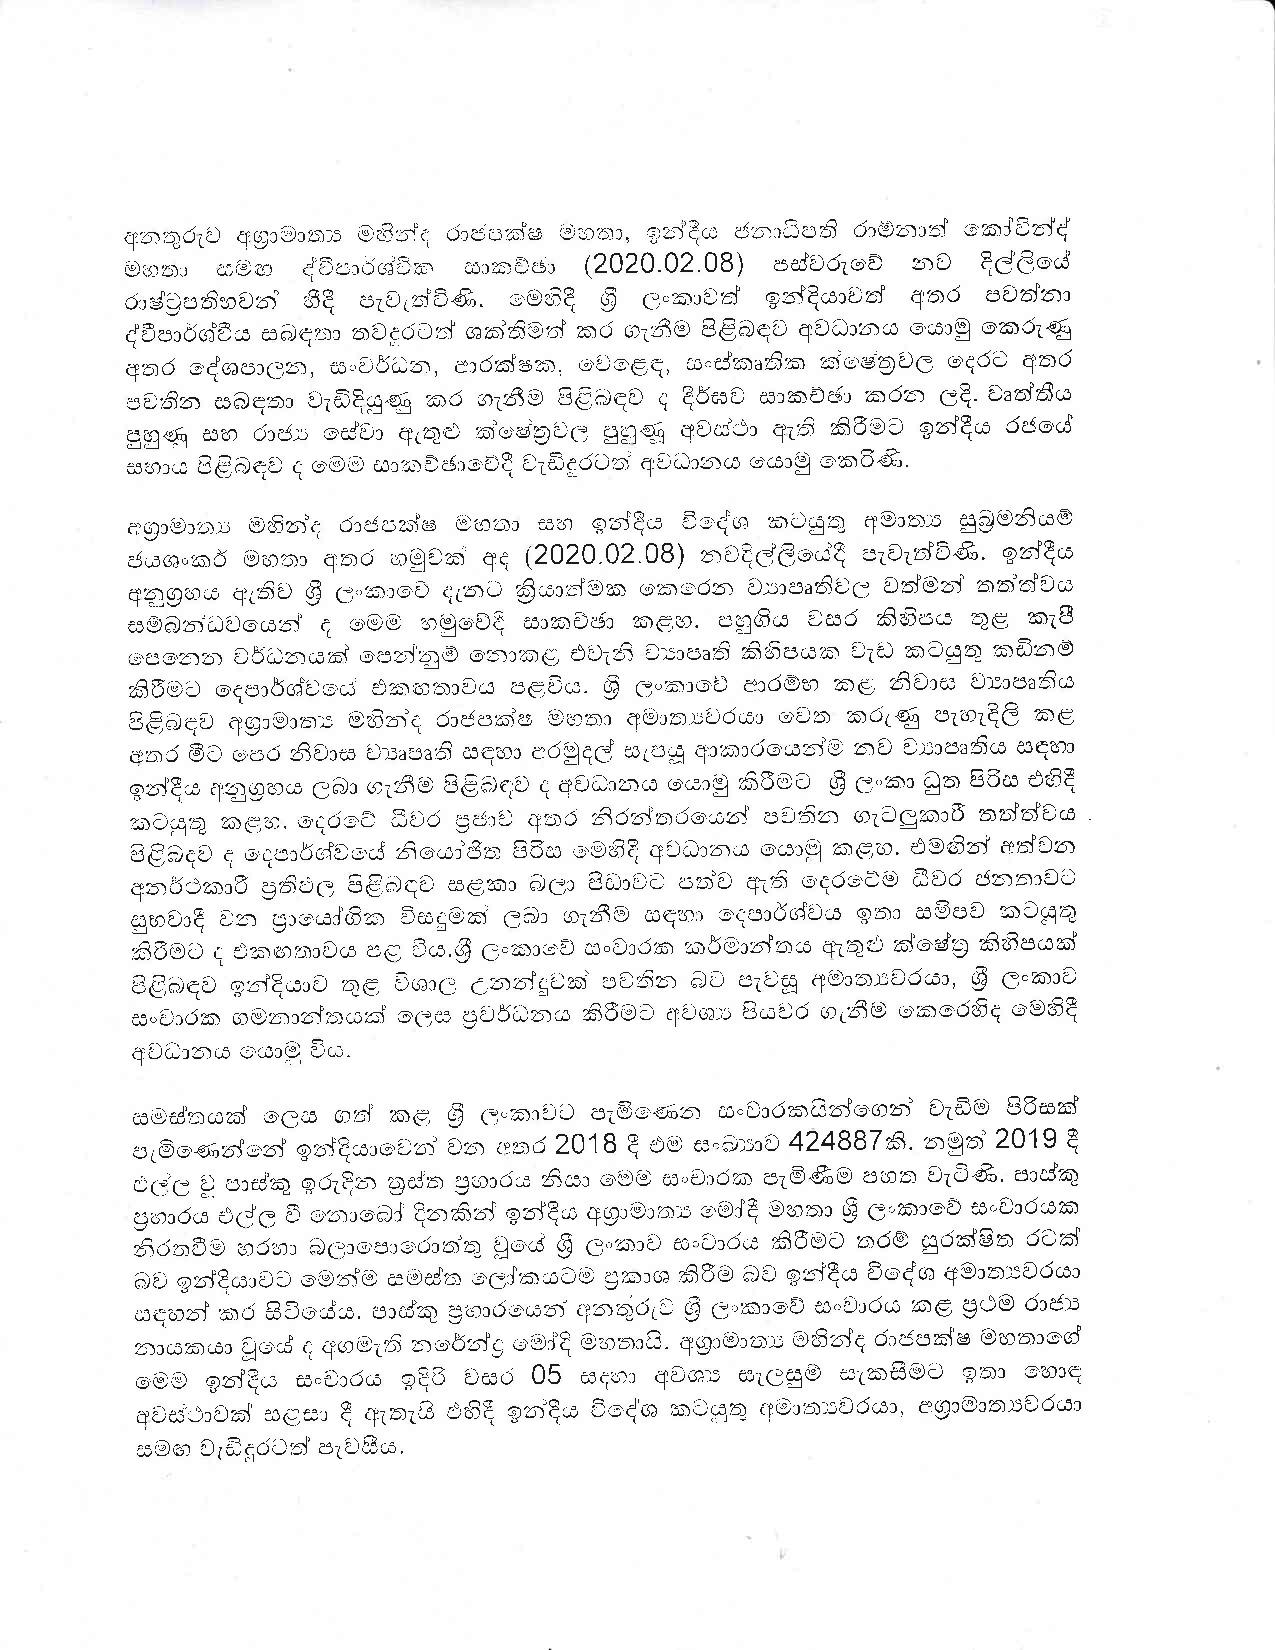 Media Release 09.02.2020 page 003